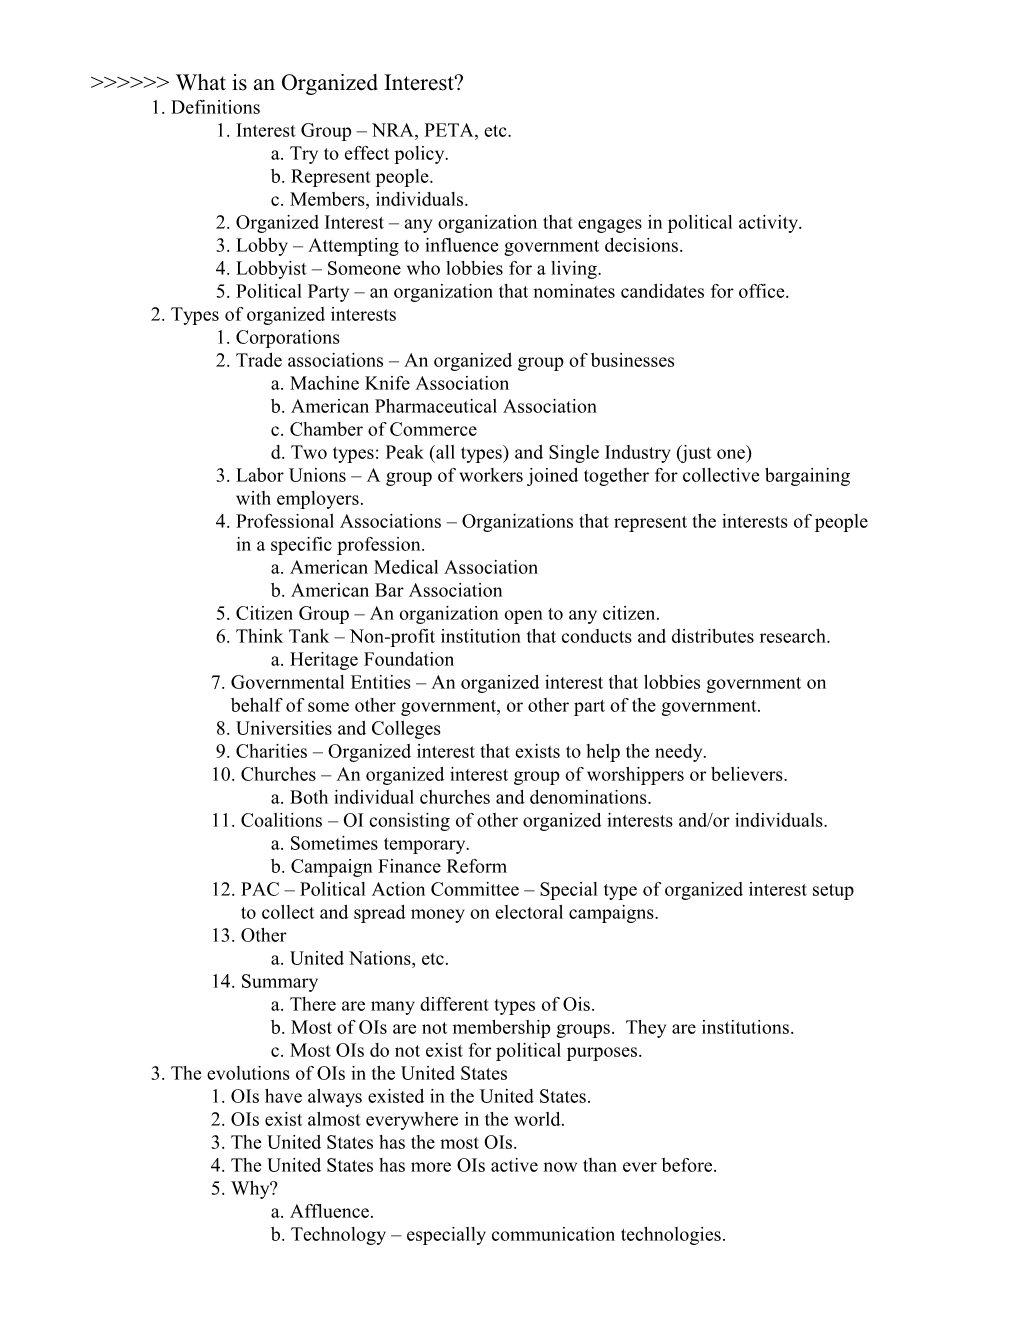 Notes for Dr. Nownes 421 Parties and Interest Groups